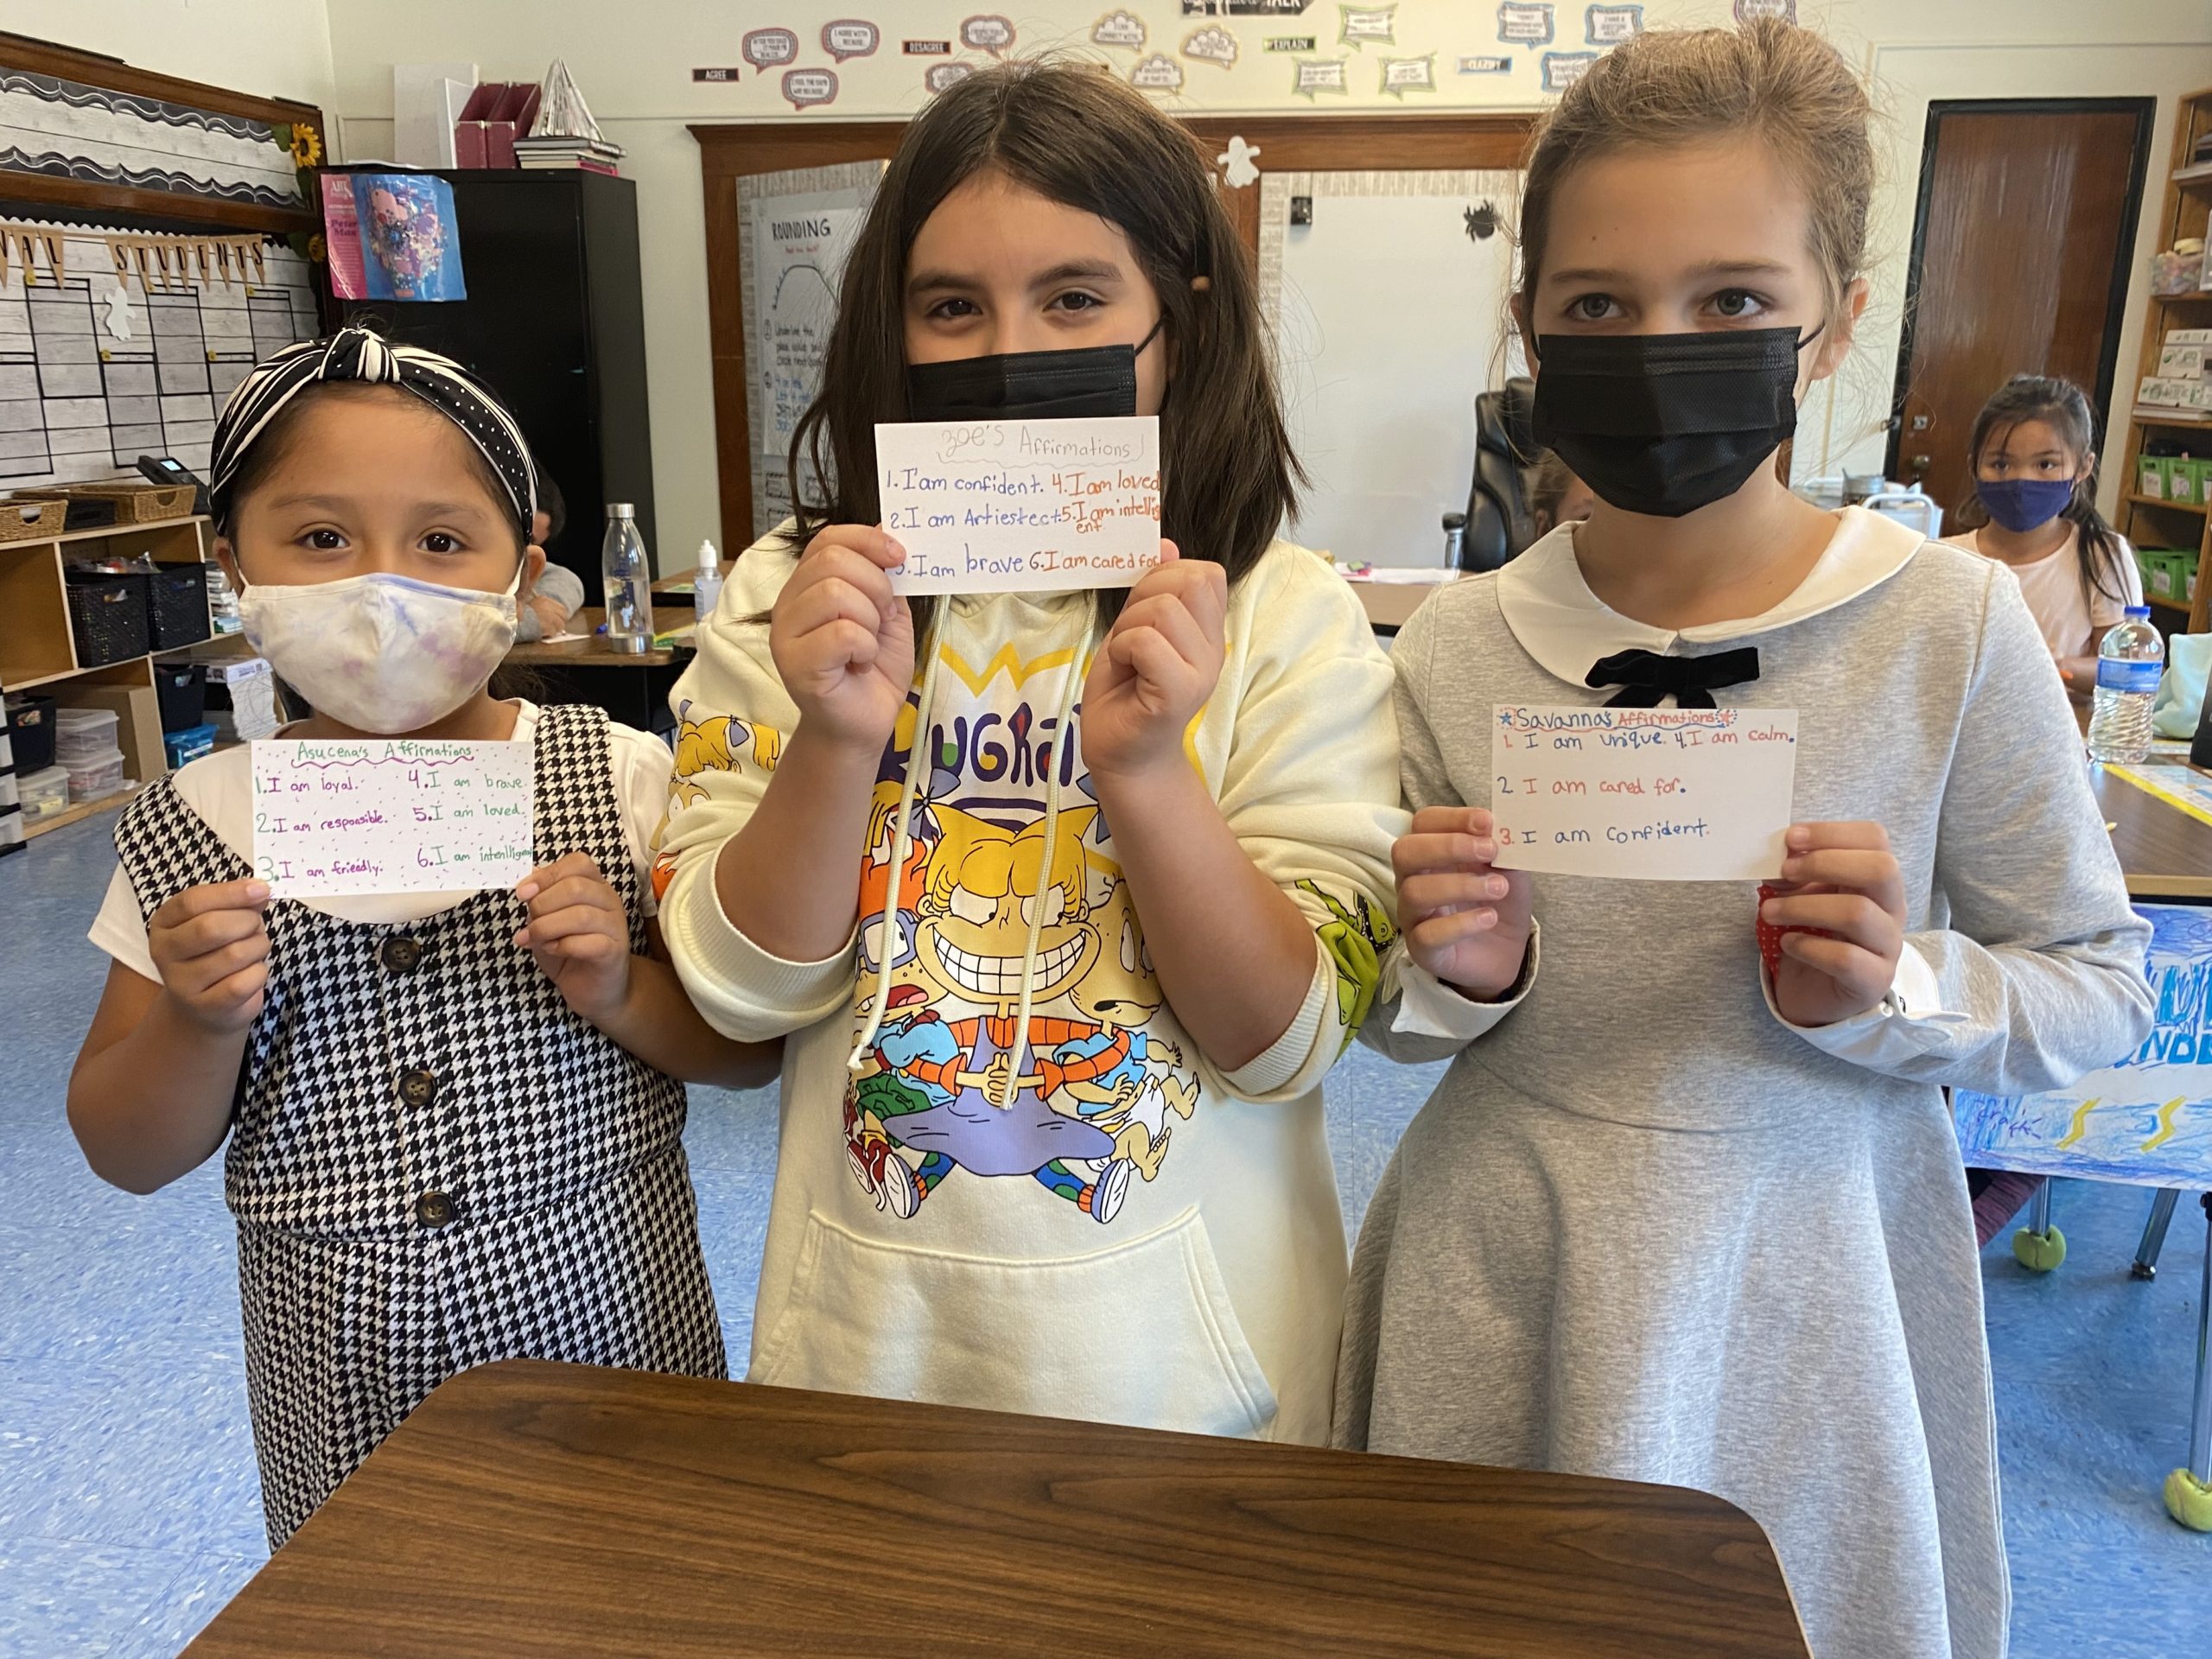 Bridgehampton School fourth-graders, left to right, Asucena Dominguez-Ramos, Zoe Urgiles and Savanna Lillie, with their positive affirmation cards.